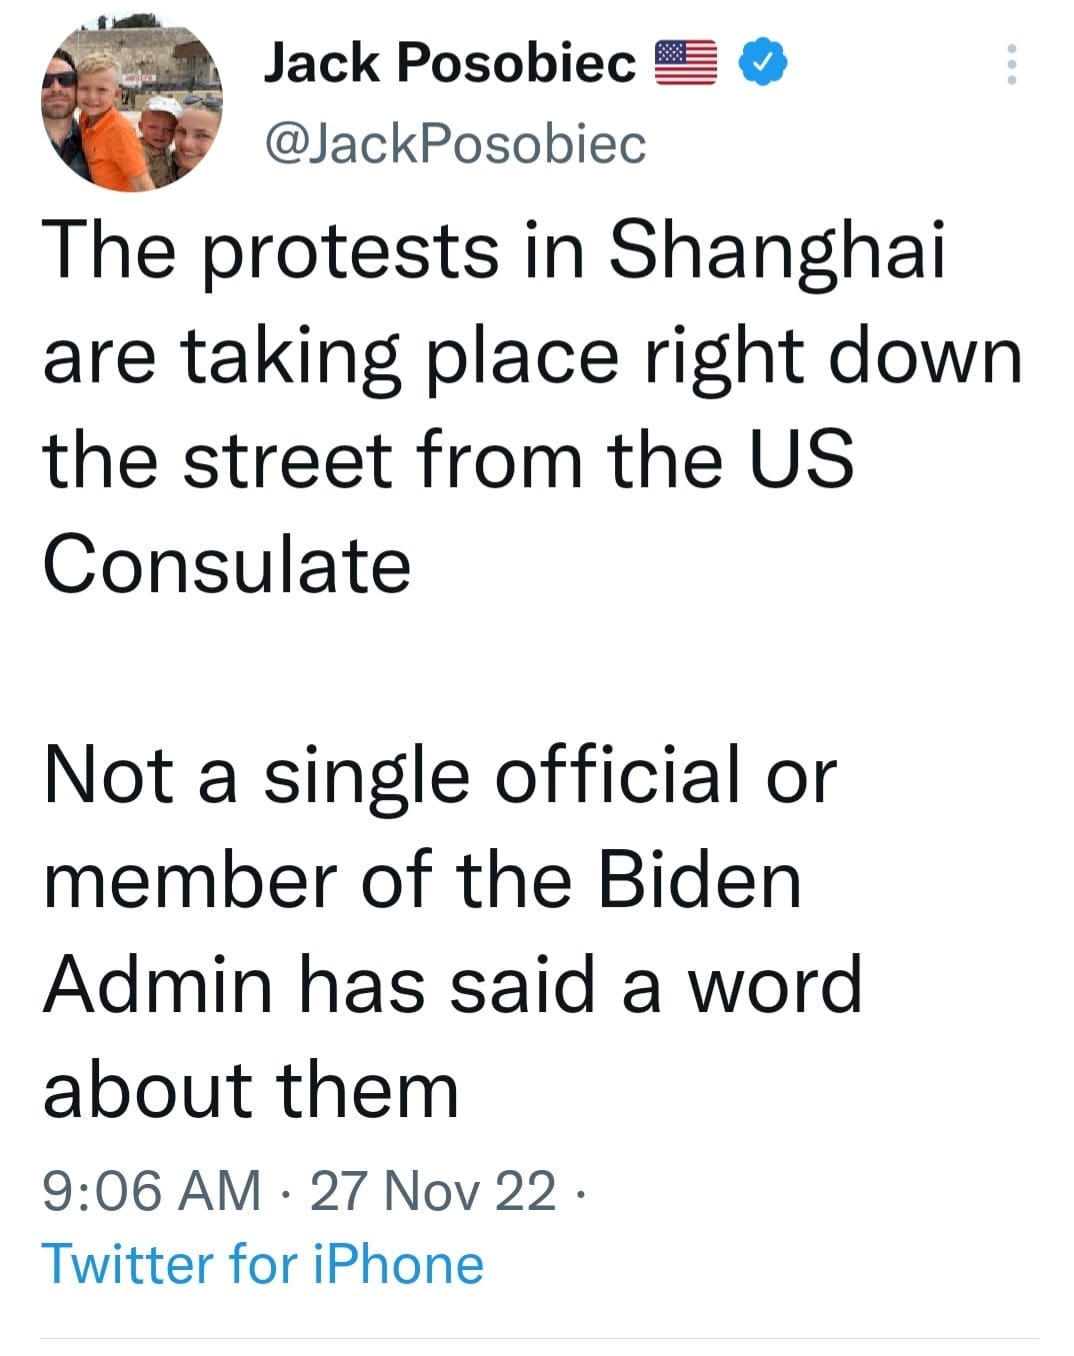 May be a Twitter screenshot of 4 people and text that says 'Jack Posobiec @JackPosobiec The protests in Shanghai are taking place right down the street from the US Consulate Not a single official or member of the Biden Admin has said a word about them 9:06 AM 27 Nov 22. 22 Twitter for Phone'